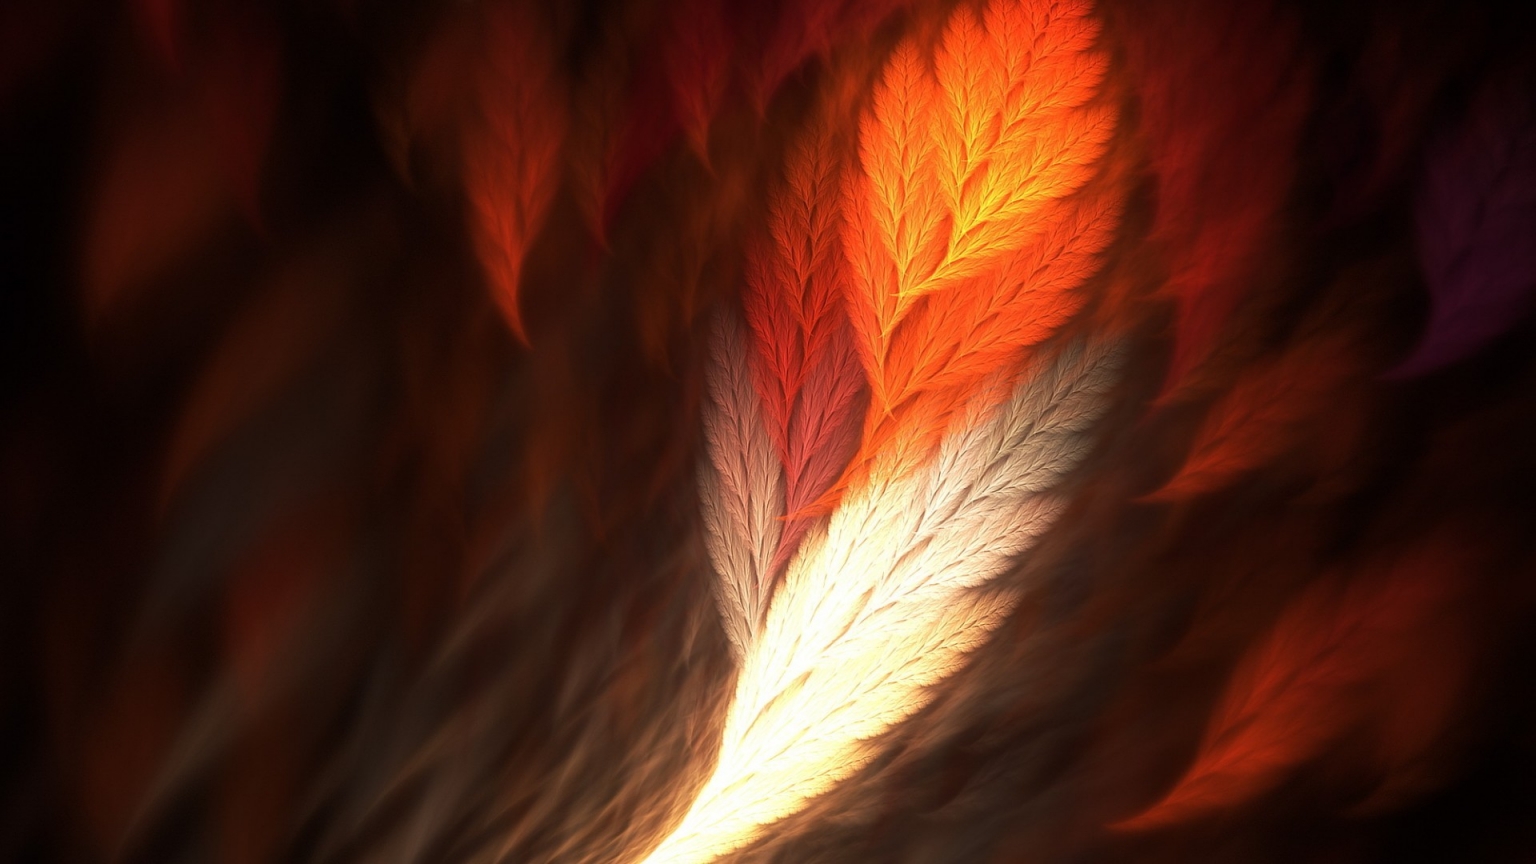 Feather Art for 1536 x 864 HDTV resolution